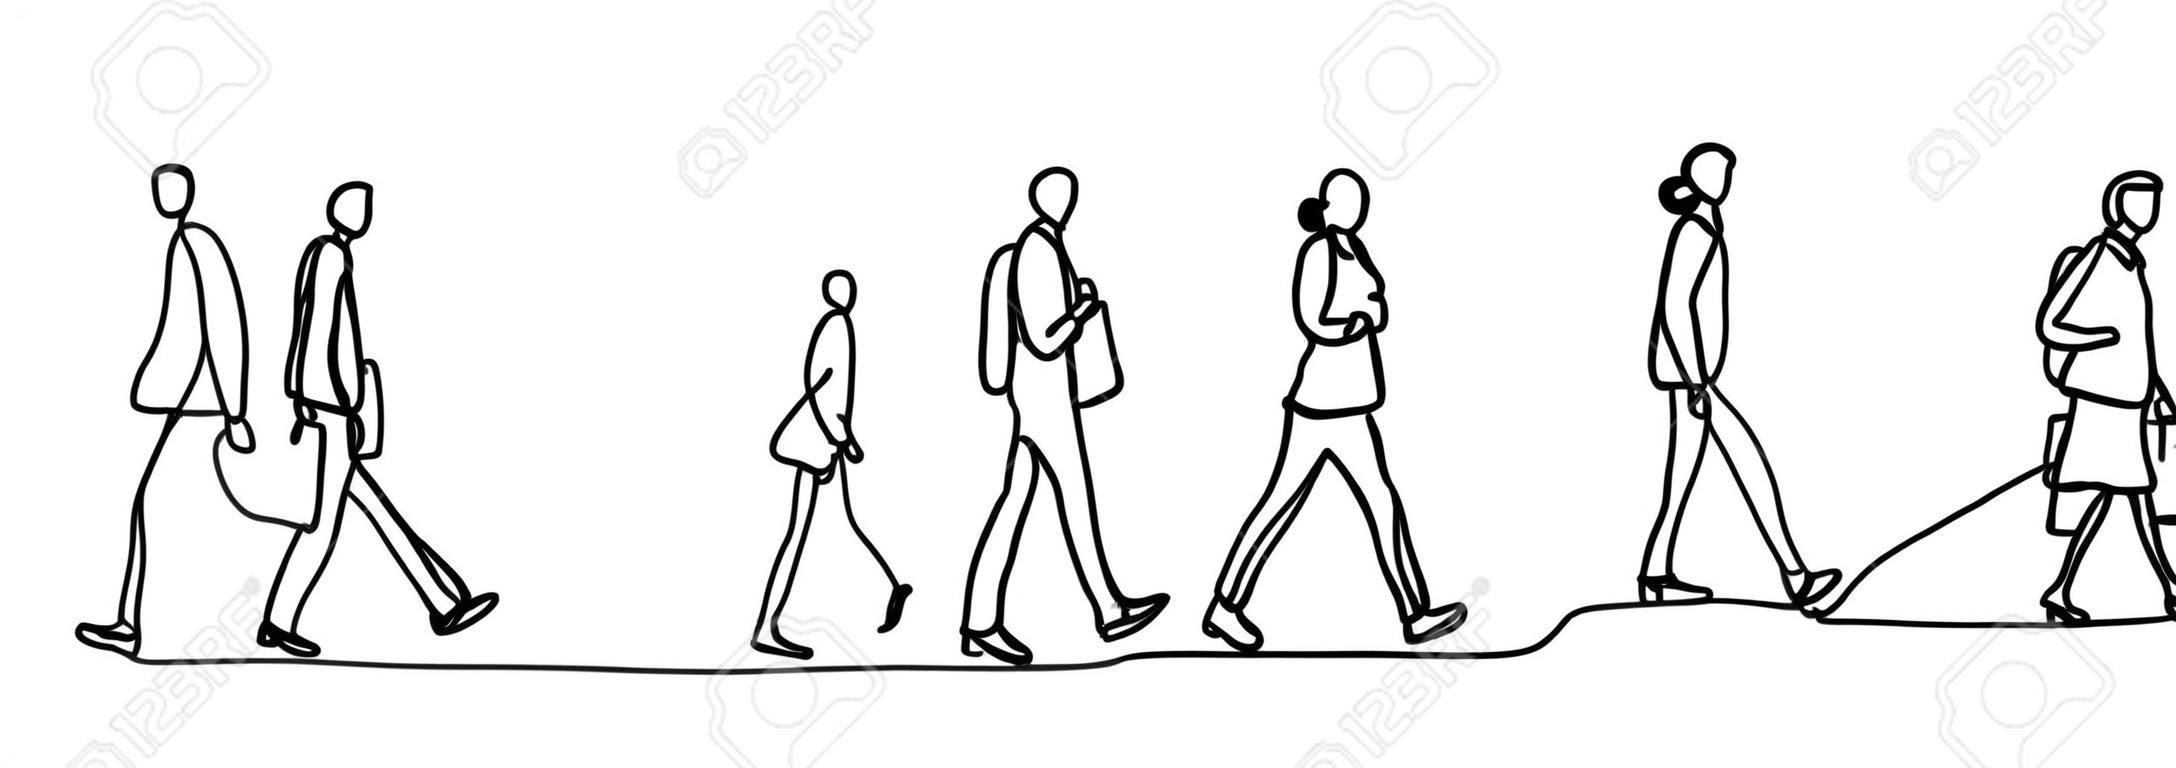 Urban commuters one continuous line drawing minimalism design sketch hand drawn vector illustration. People walking before or after work time.